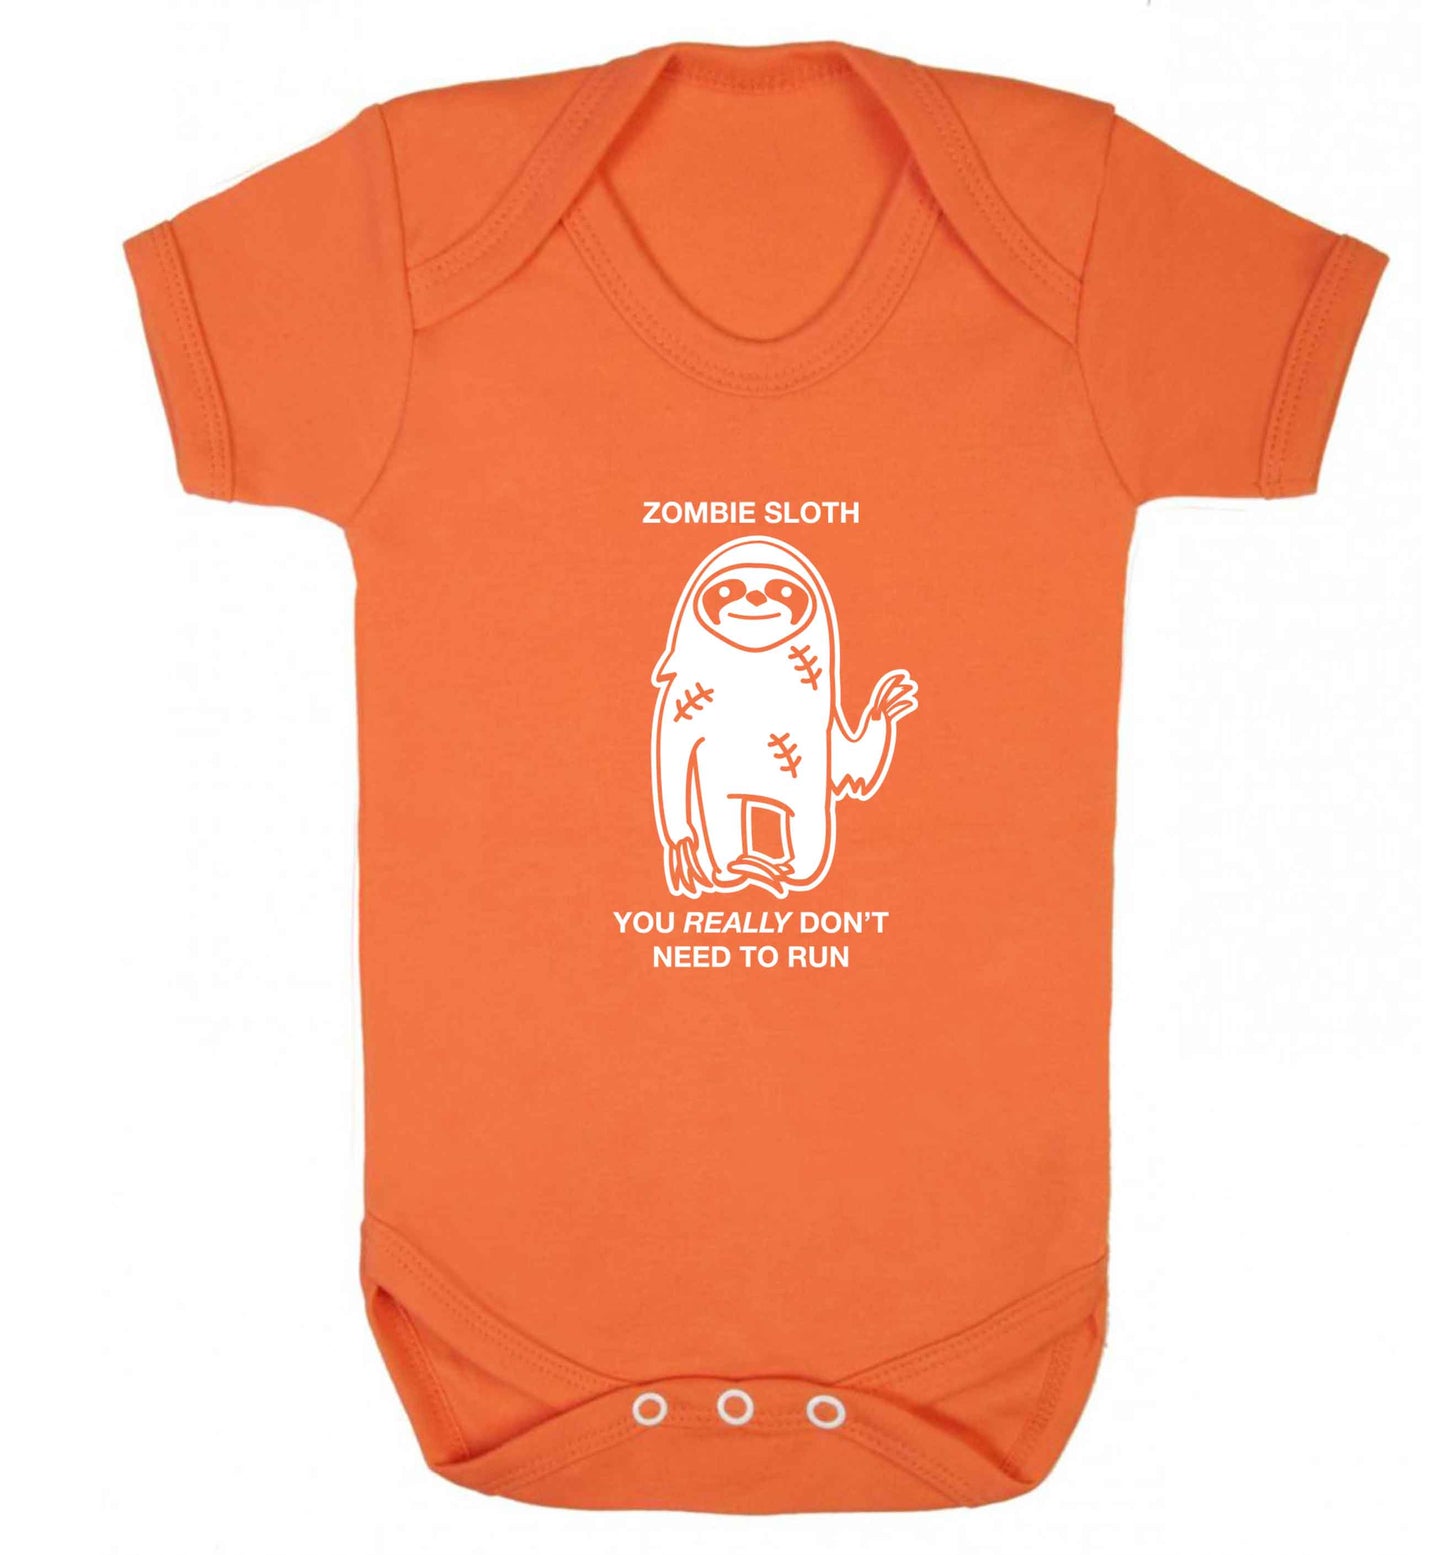 Zombie sloth you really don't need to run baby vest orange 18-24 months